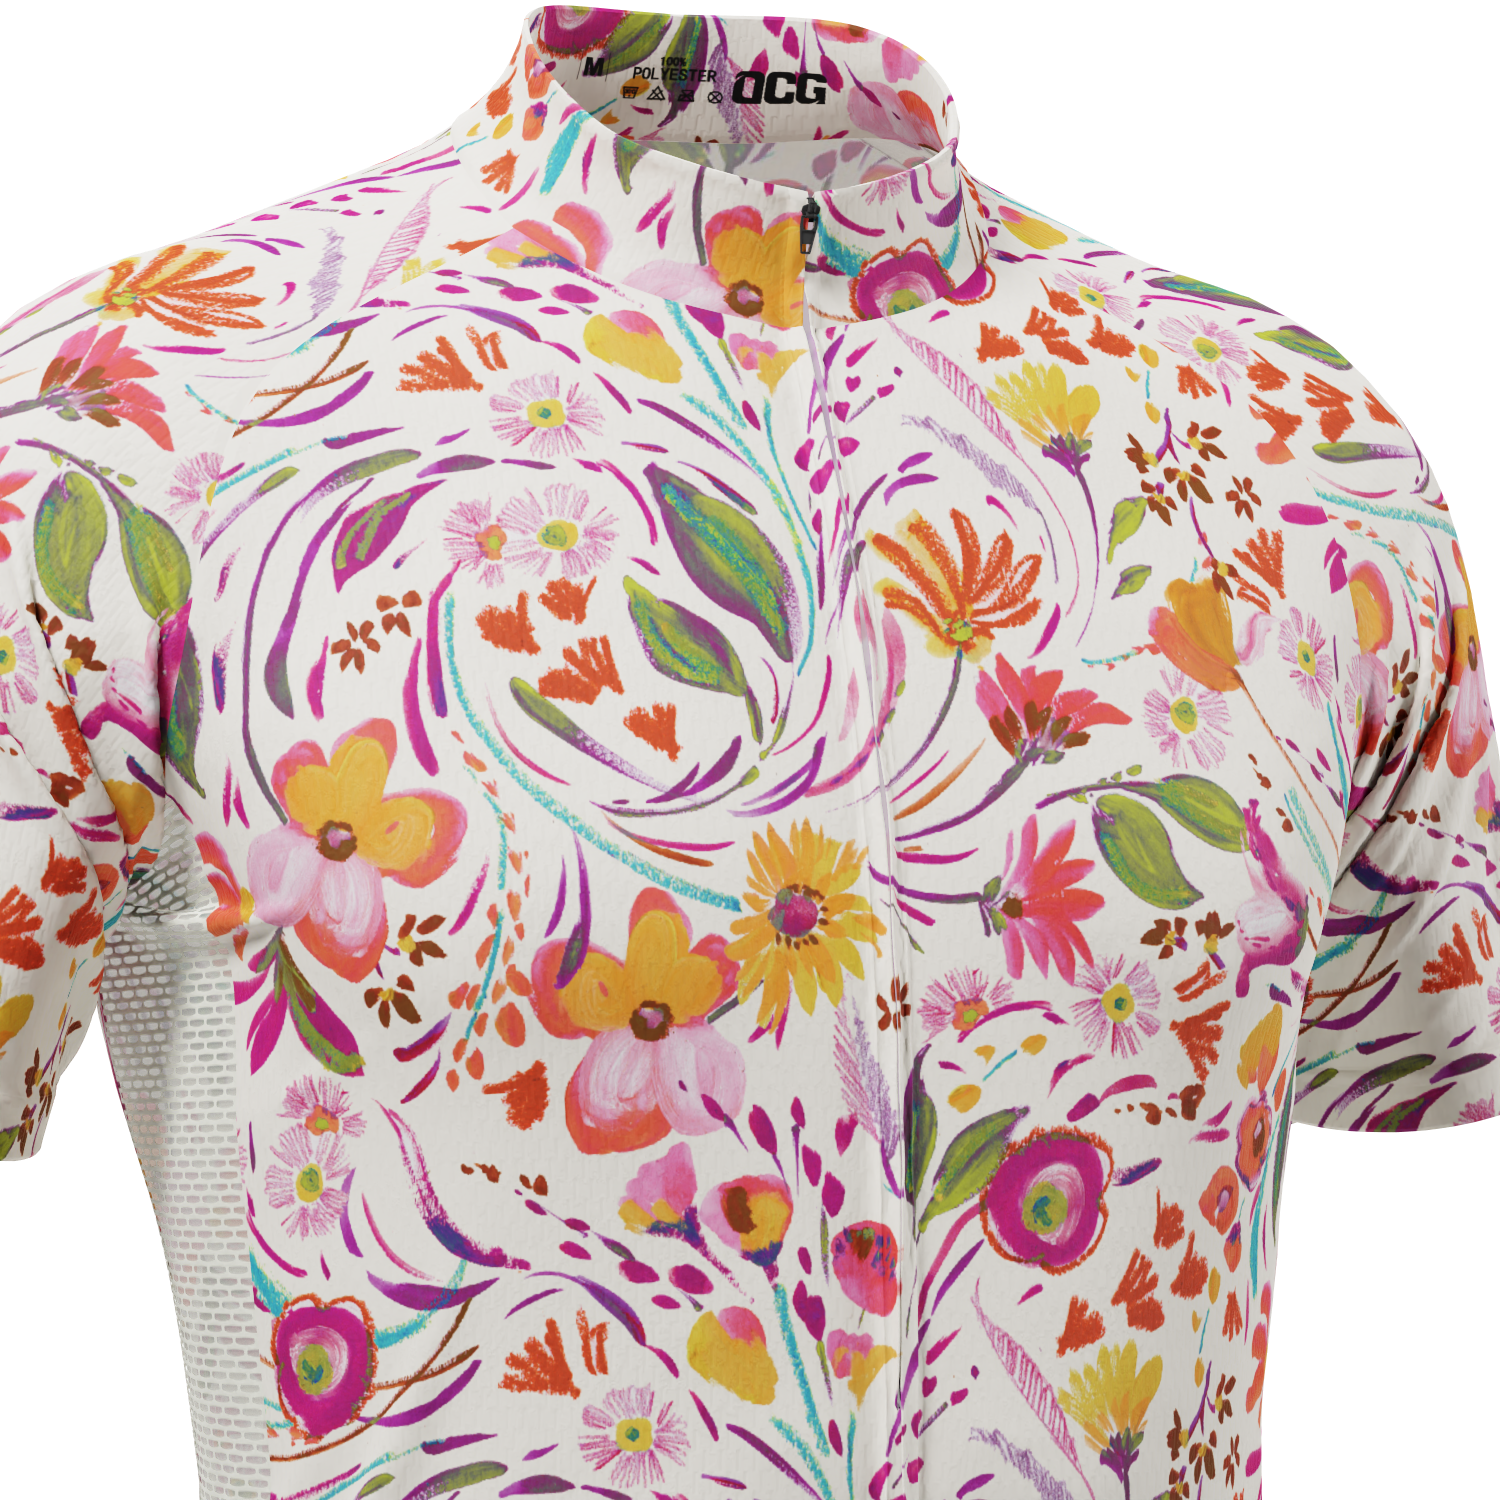 Men's Painterly Blooms Short Sleeve Cycling Jersey